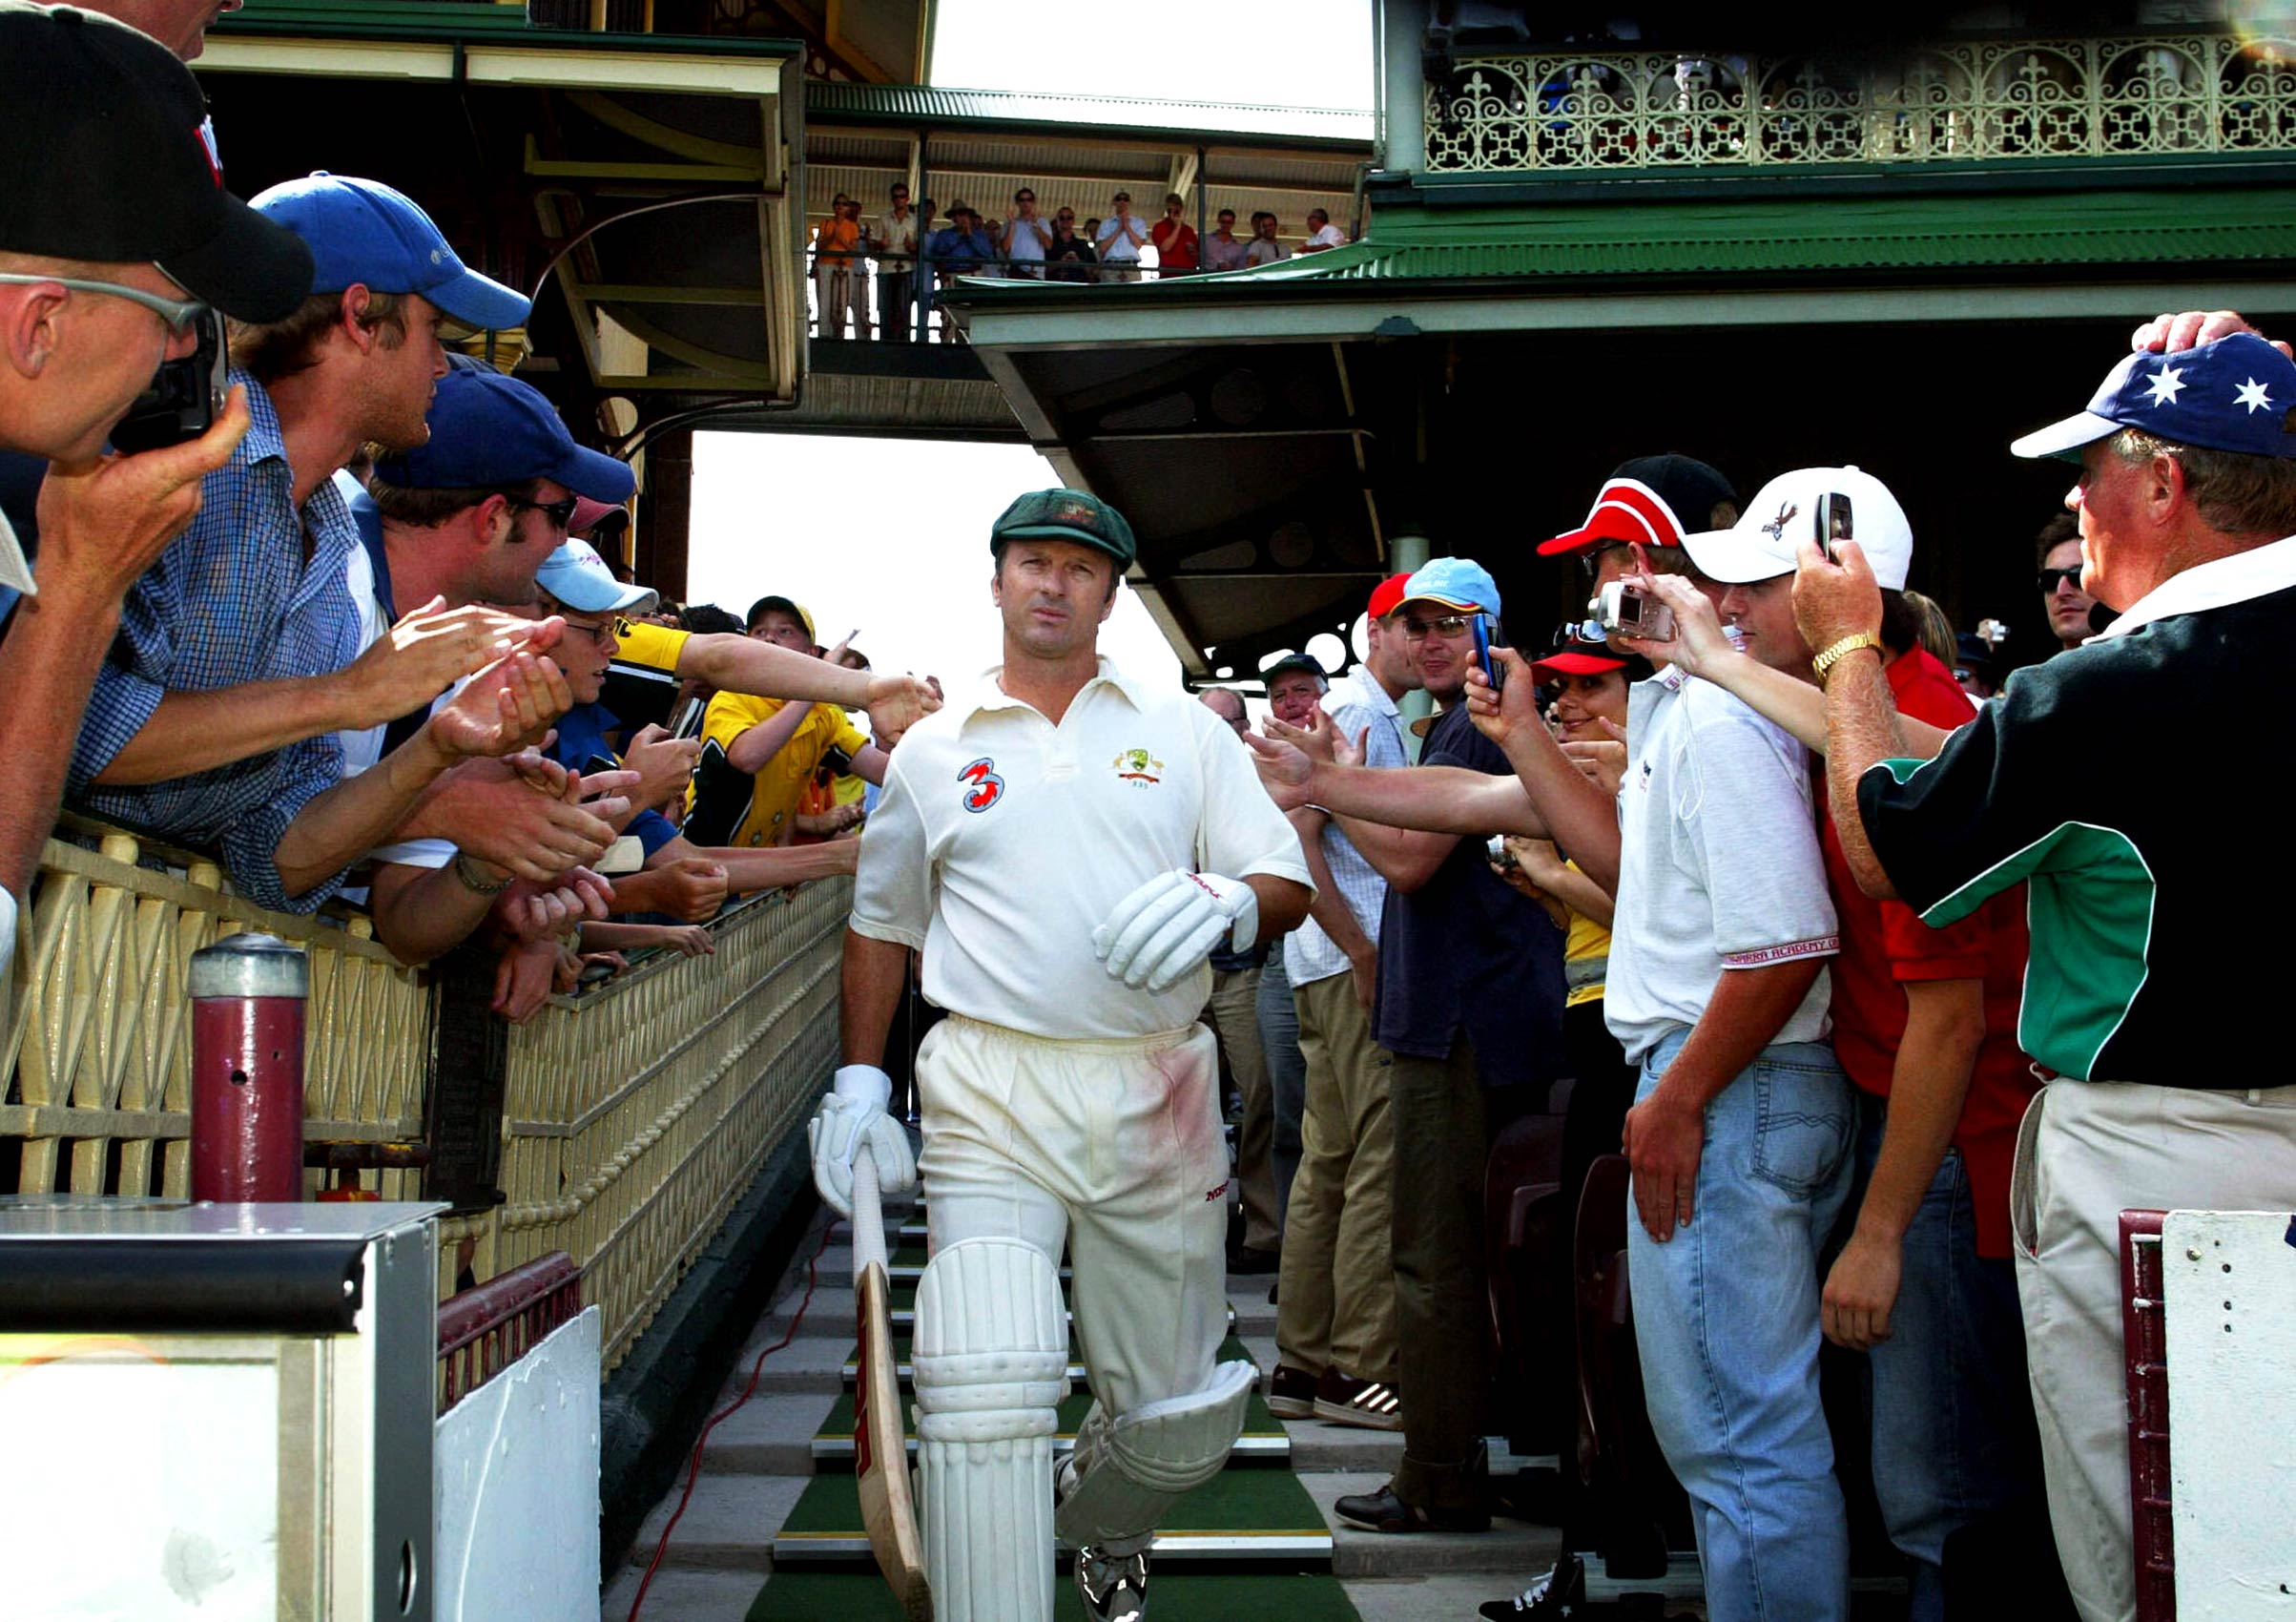   CRICKET - 4.1.04 - Australia v India at the SCG. Steve Waugh makes his way out to bat during his last Test match in Sydney. pic. Phil Hillyard 
  